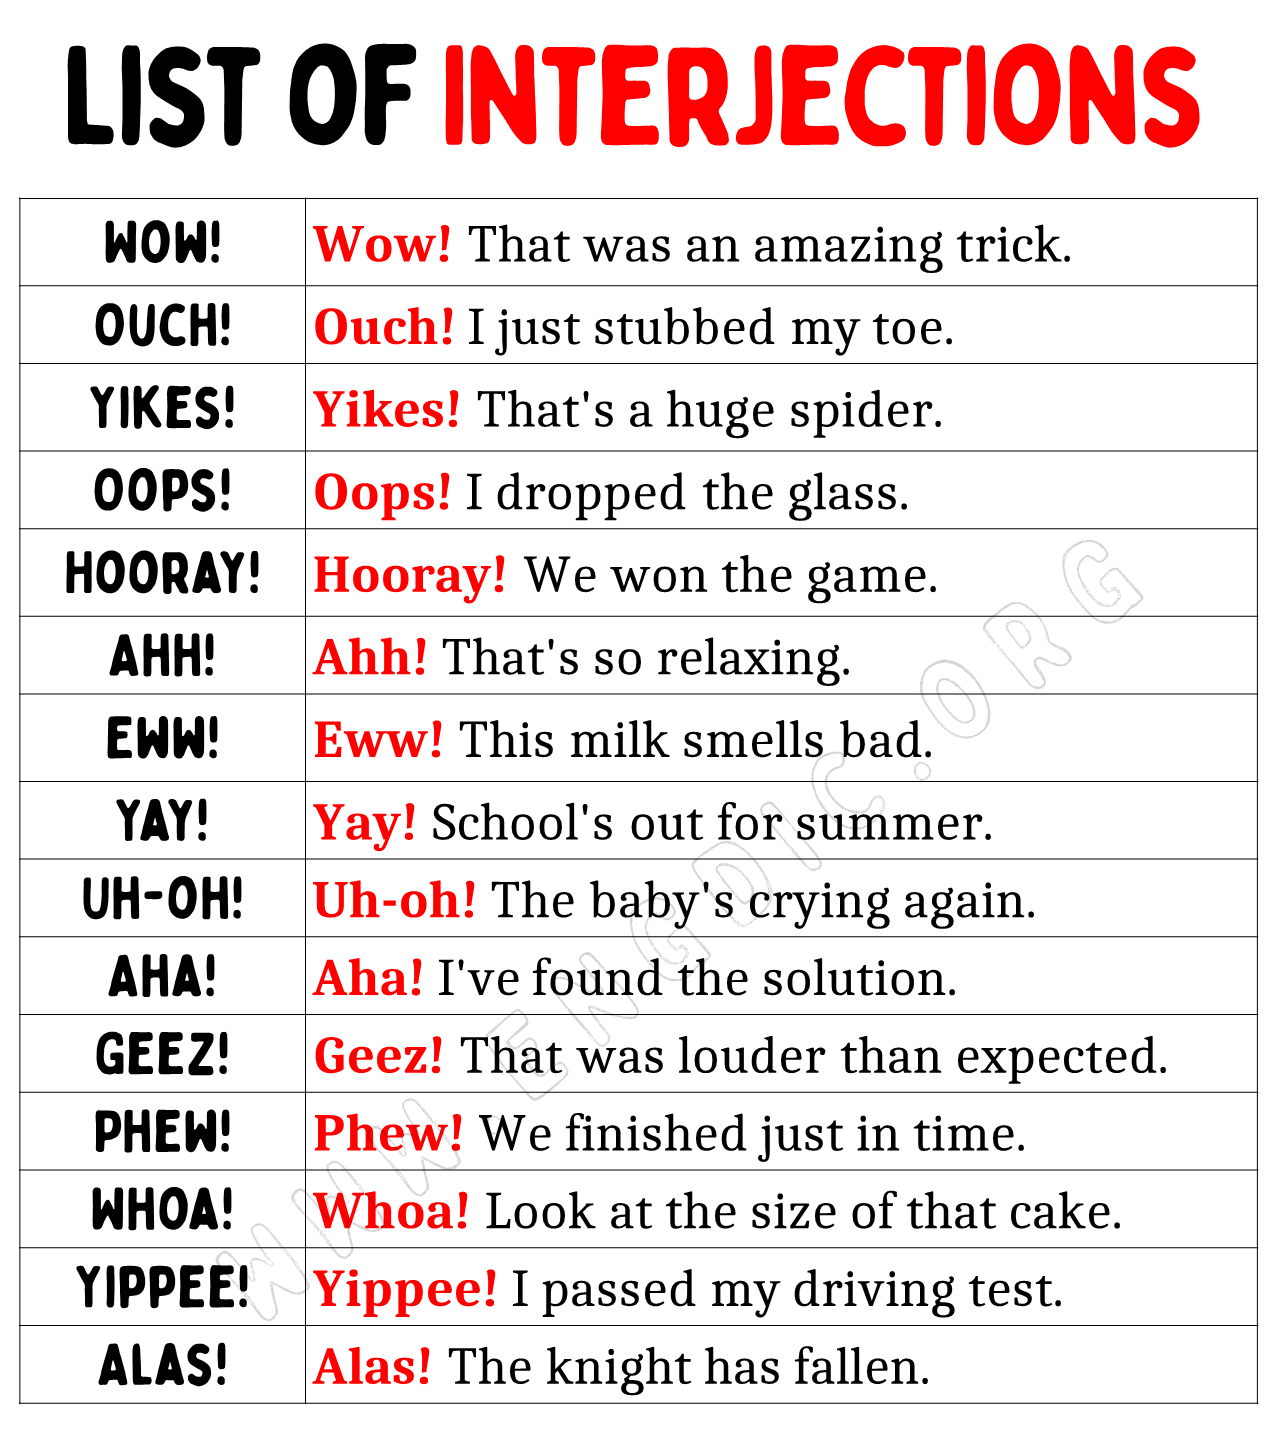 List of Interjections